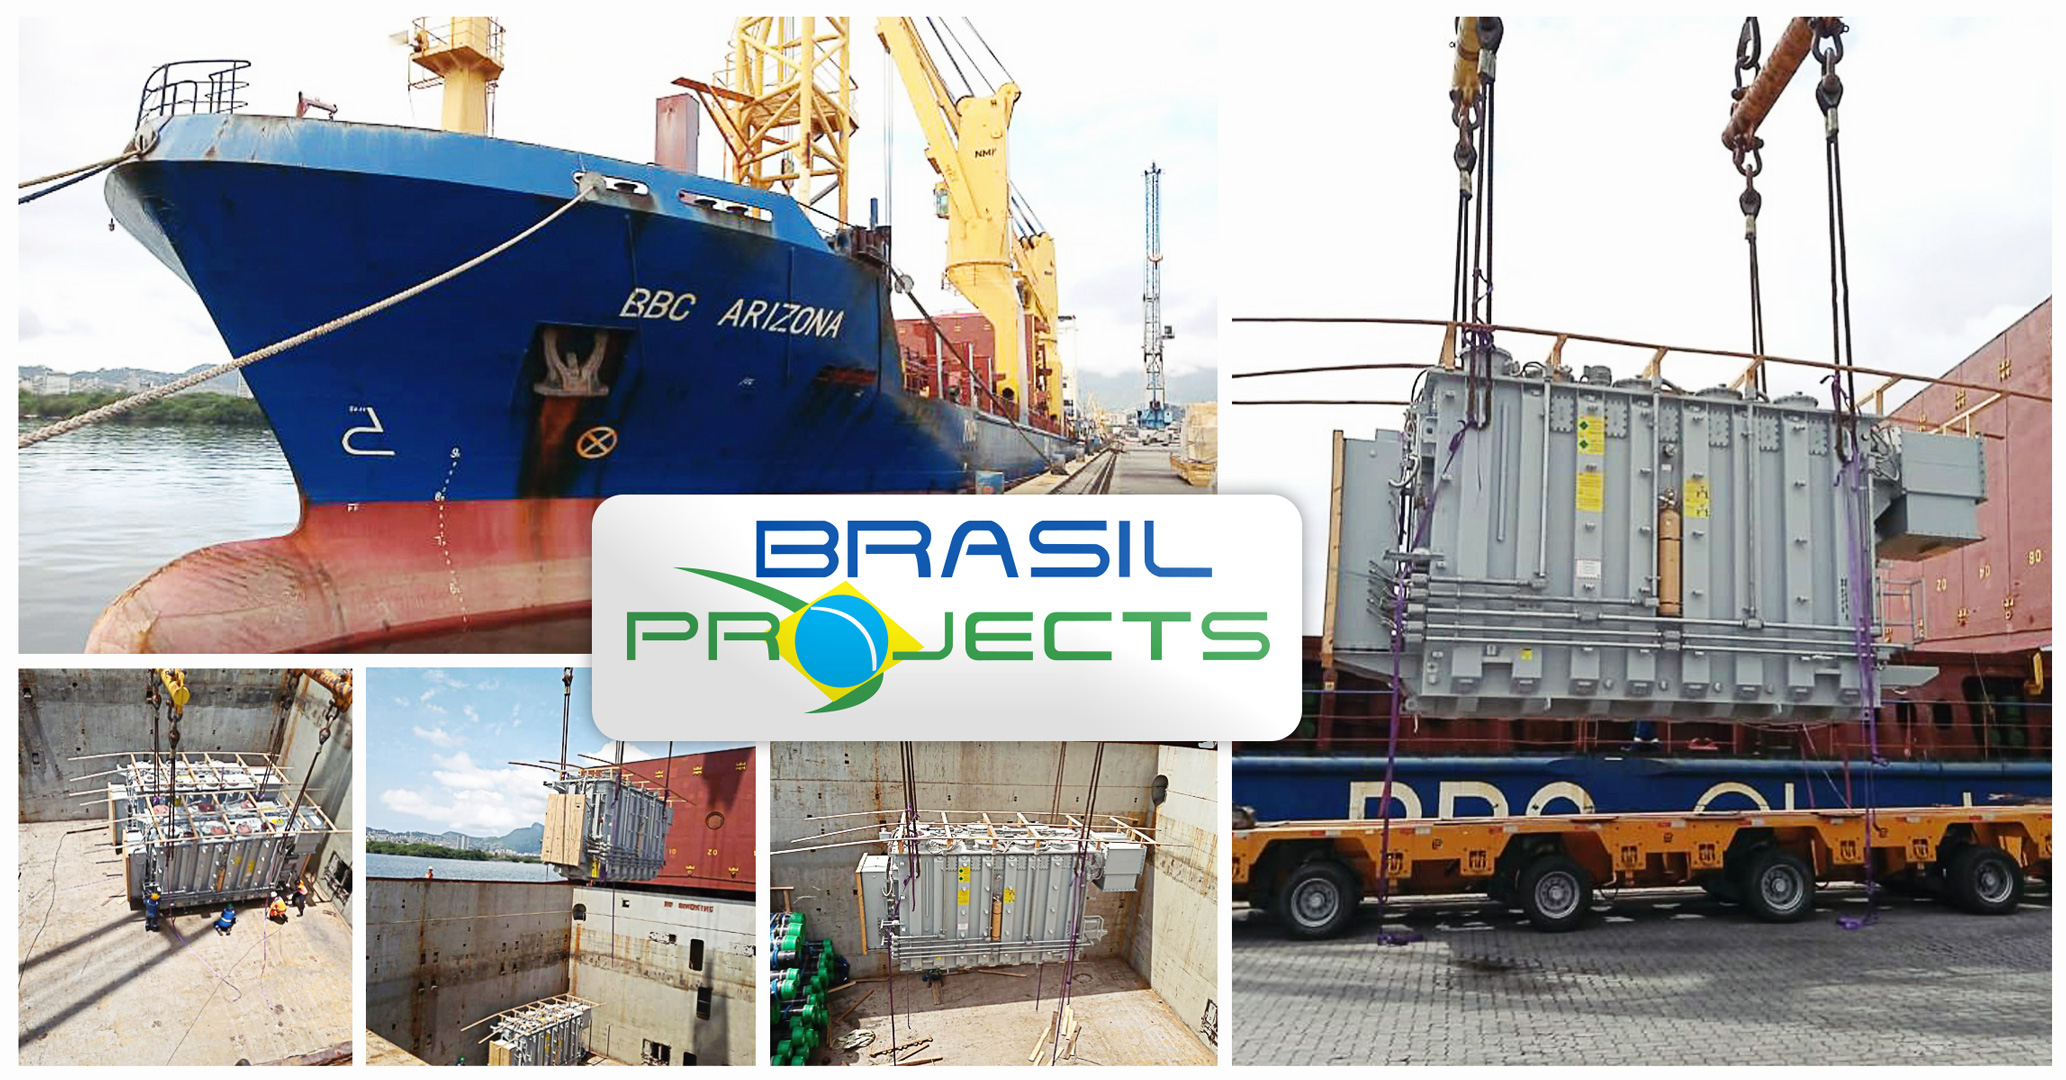 Brasil Projects Executed a Shipment of 2 x 85.3mt Transformers from Terminal Multirio, Rio de Janeiro to Houston, United States